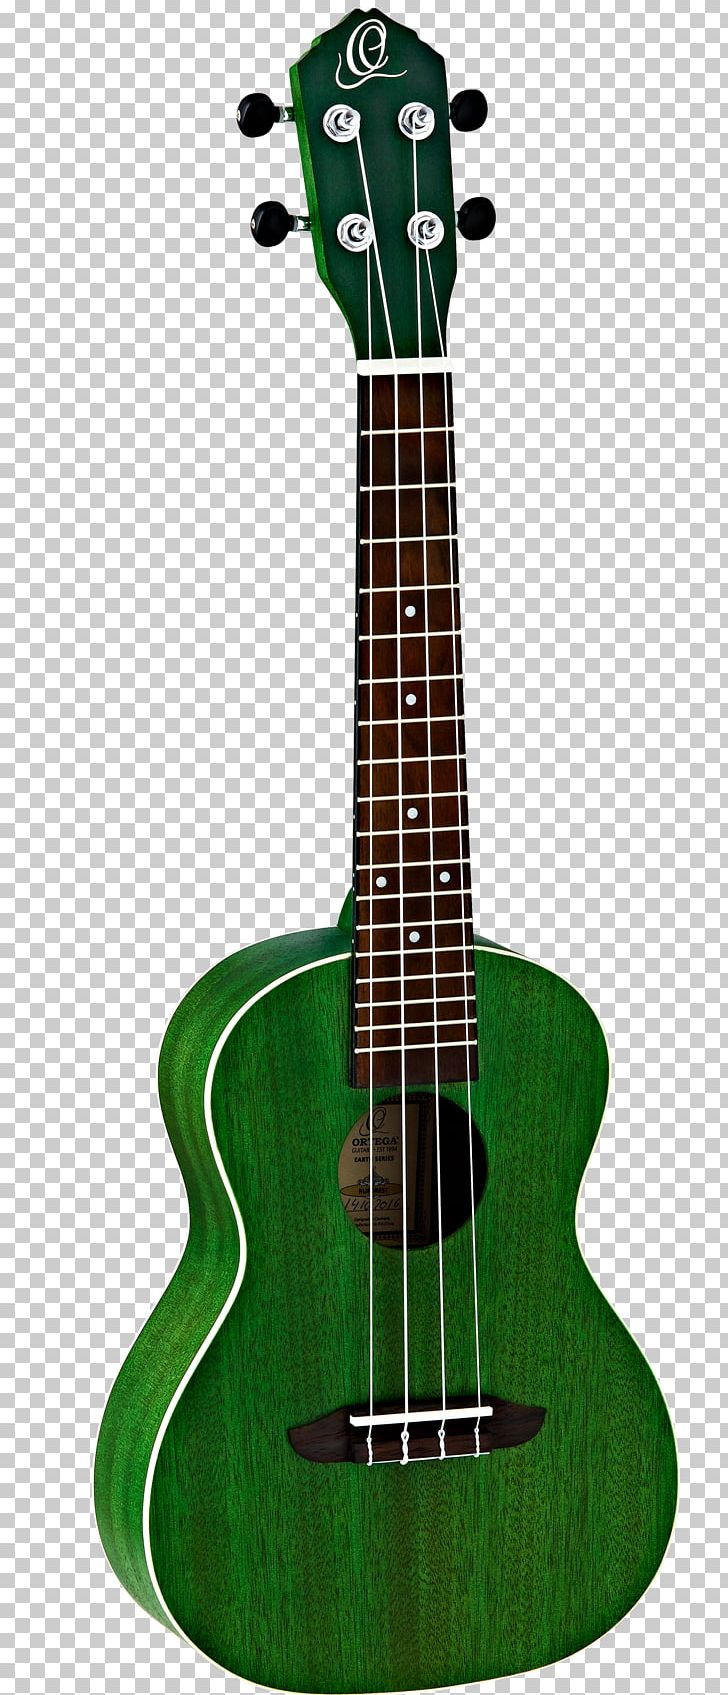 Ukulele Musical Instruments String Instruments Acoustic-electric Guitar PNG, Clipart, Acoustic Electric Guitar, Classical Guitar, Concert, Cuatro, Guitar Accessory Free PNG Download